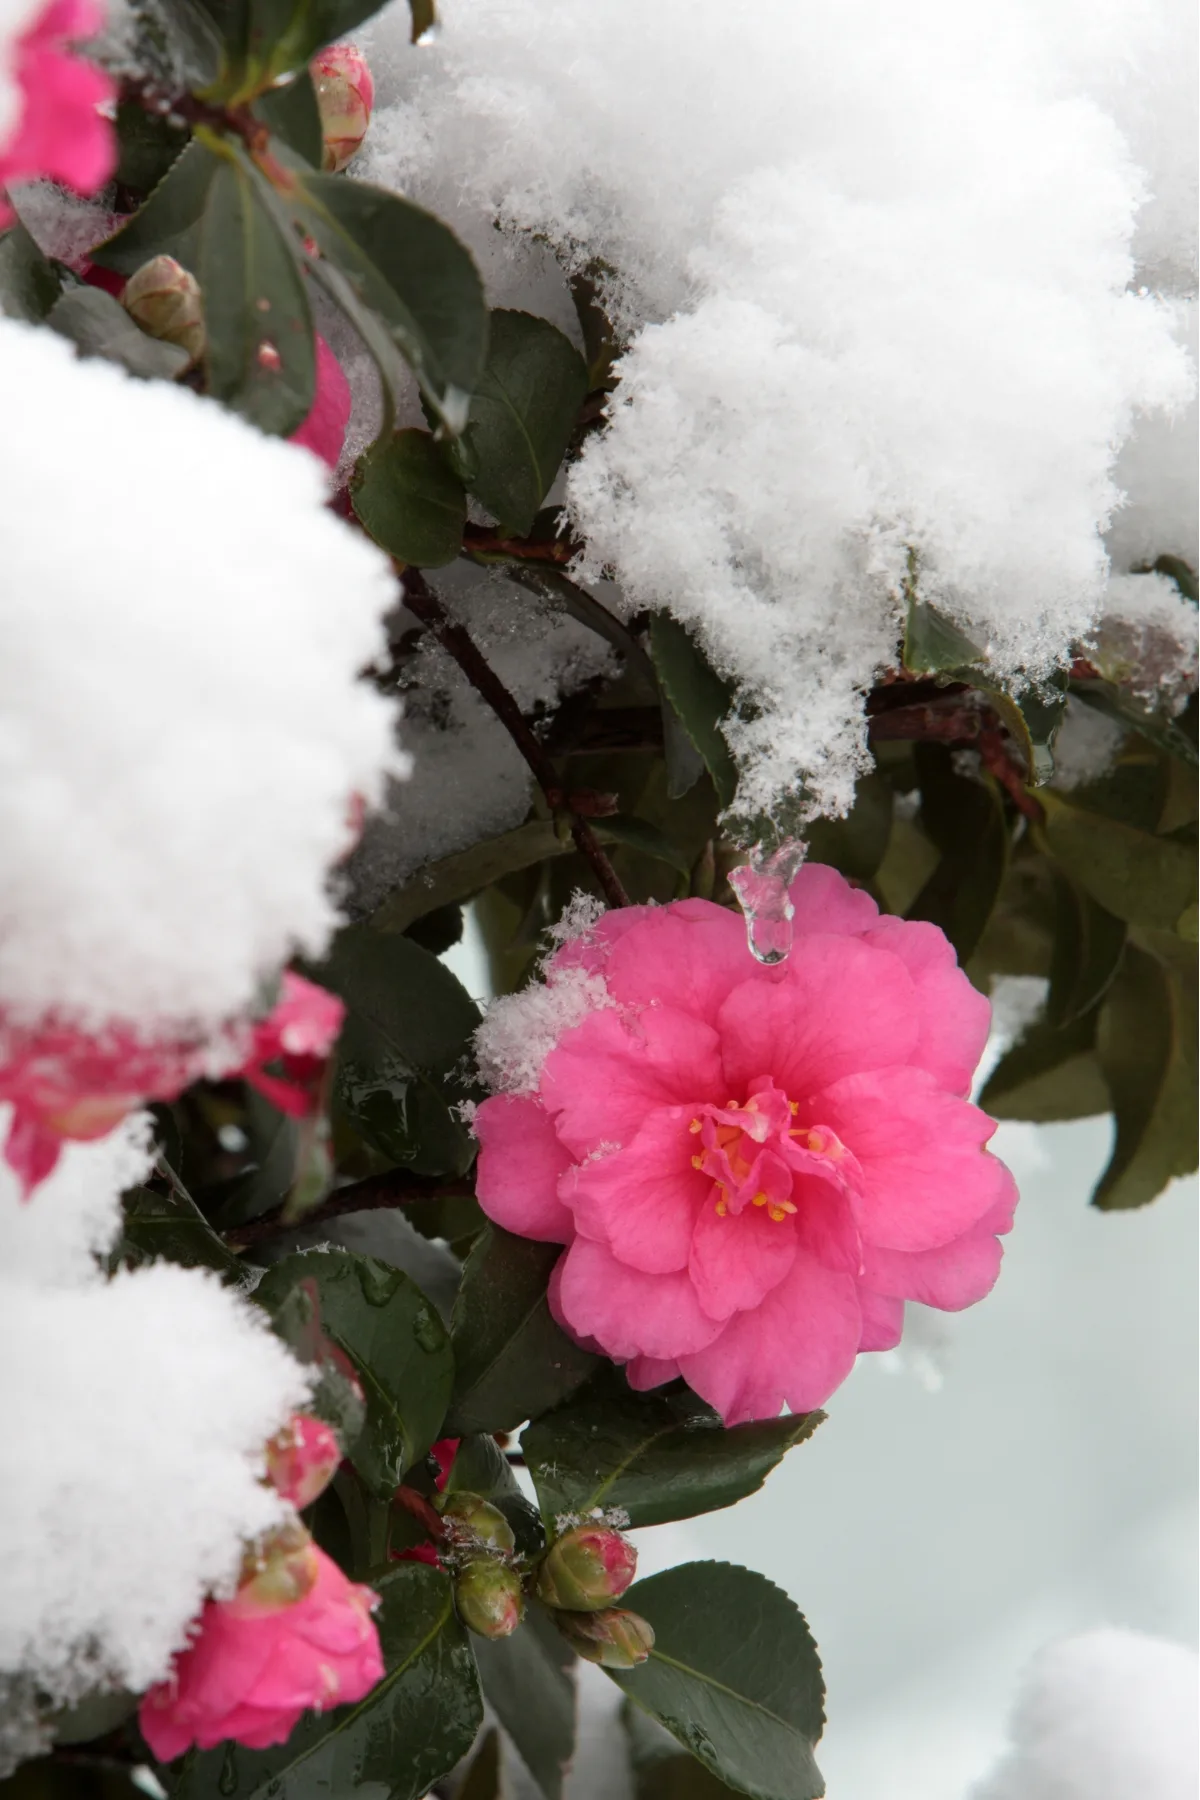 pink camellia blooming in snow